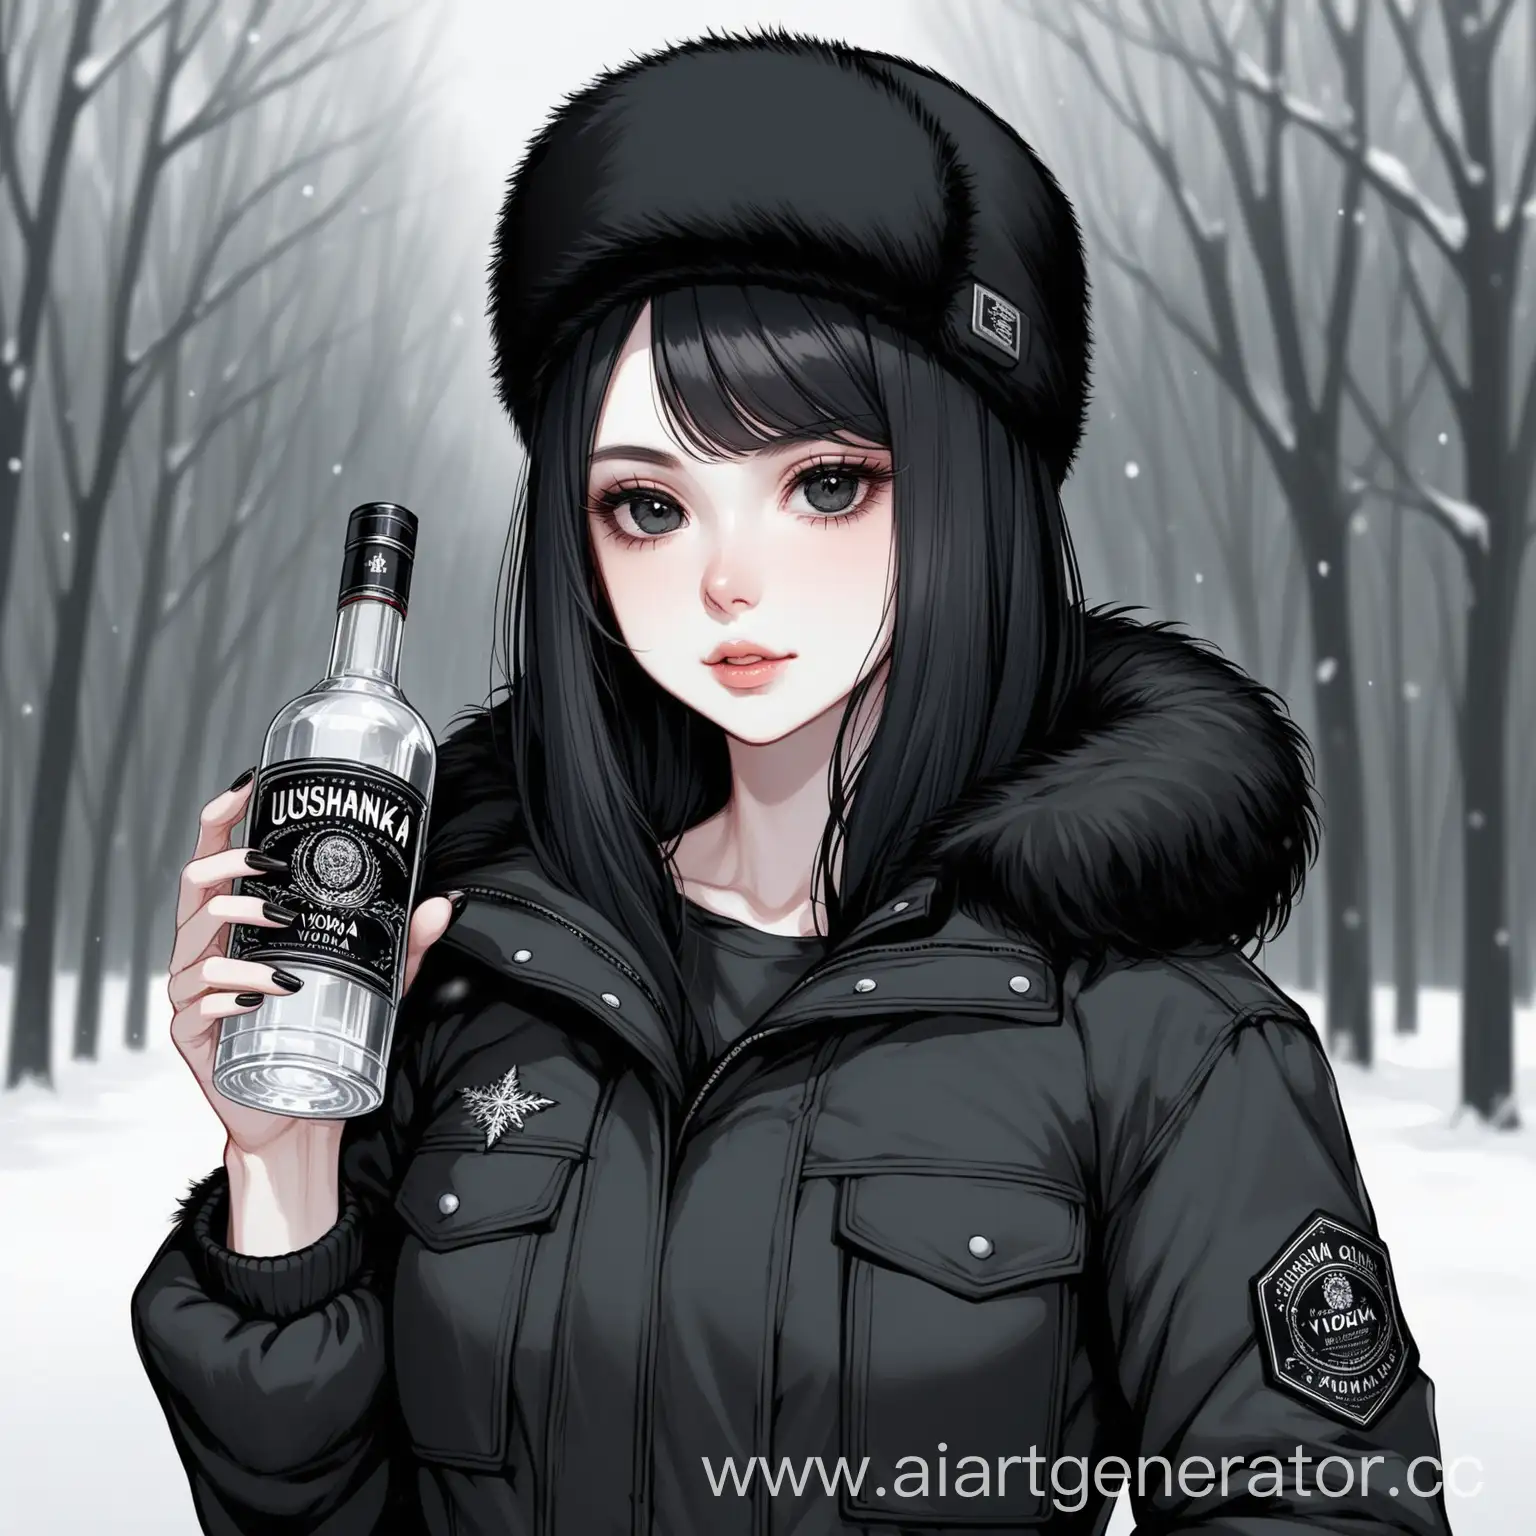 Woman-with-Pale-Skin-and-Black-Hair-Wearing-Ushanka-and-Holding-Vodka-Bottle